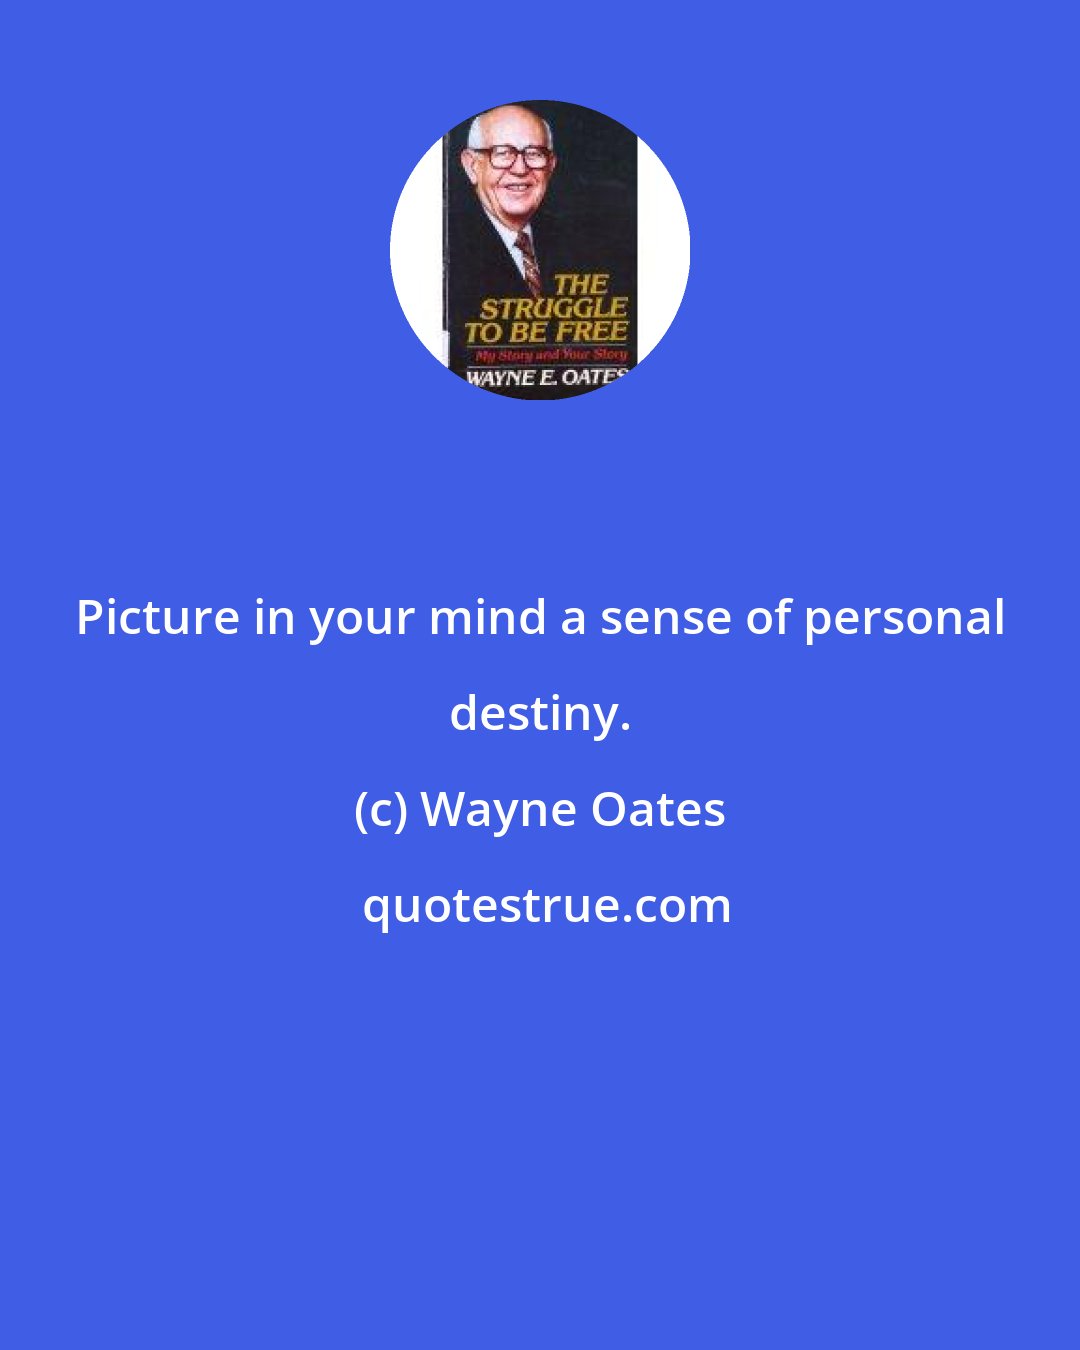 Wayne Oates: Picture in your mind a sense of personal destiny.